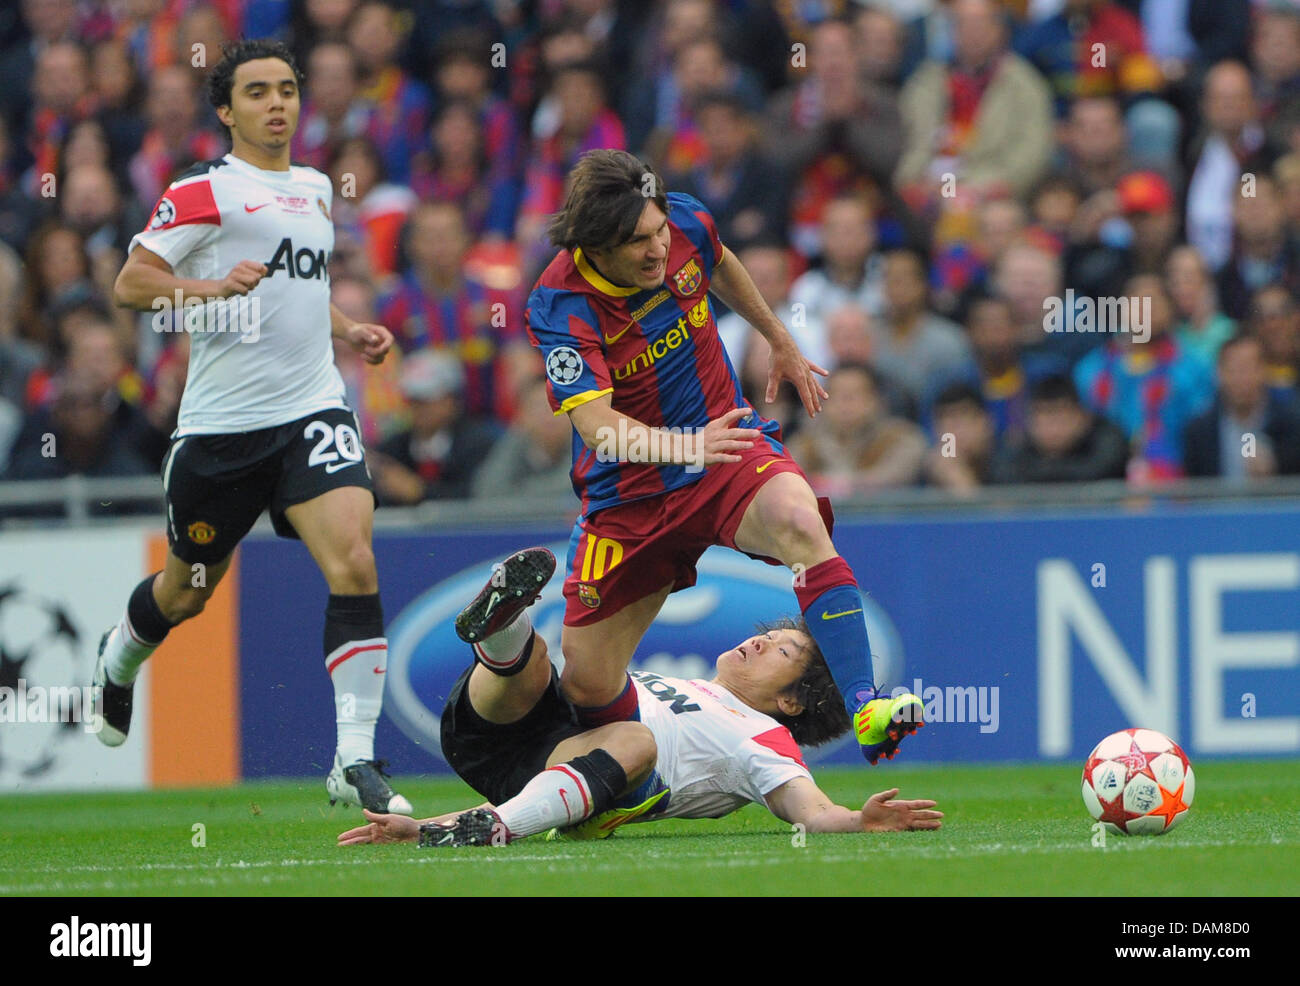 Manchester United's Ji-Sung Park (bottom) fights for the ball with Lionel Messi (R) of Barcelona during the UEFA Champions League final between FC Barcelona and Manchester United at the Wembley Stadium, London, Britain, 28 May 2011. Photo: Soeren Stache Stock Photo